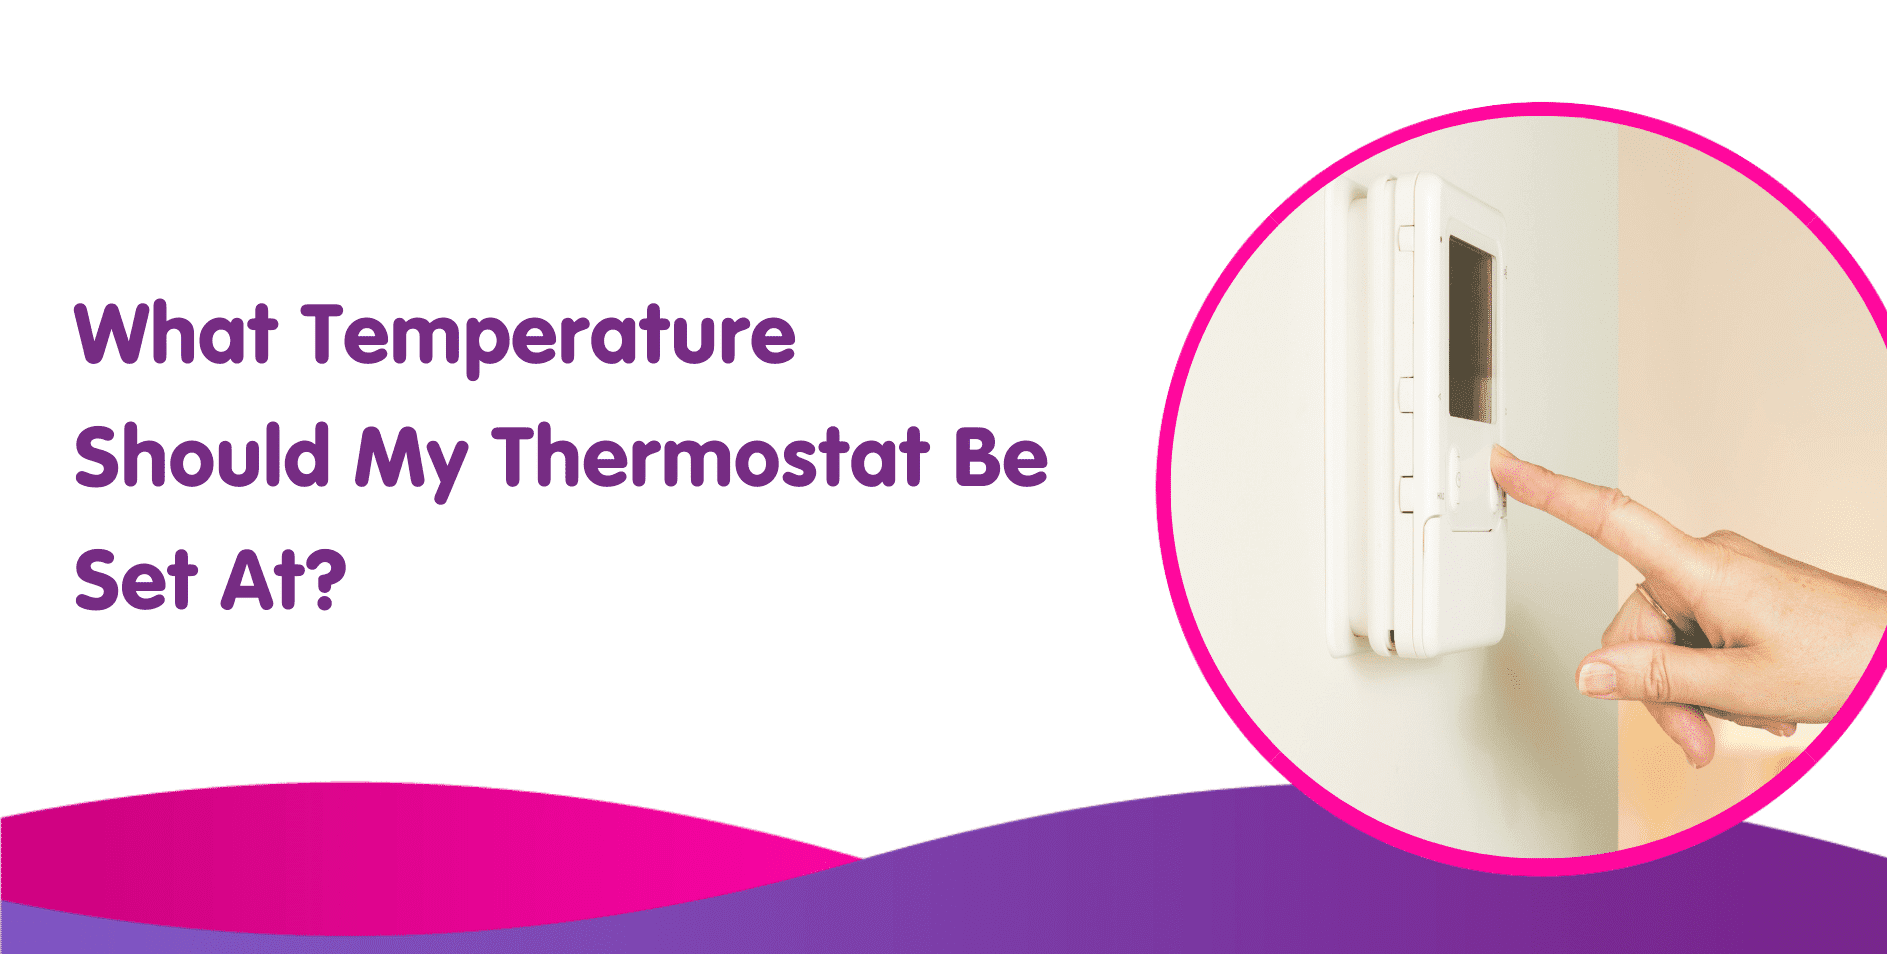 What Temperature Should My Thermostat Be Set At?